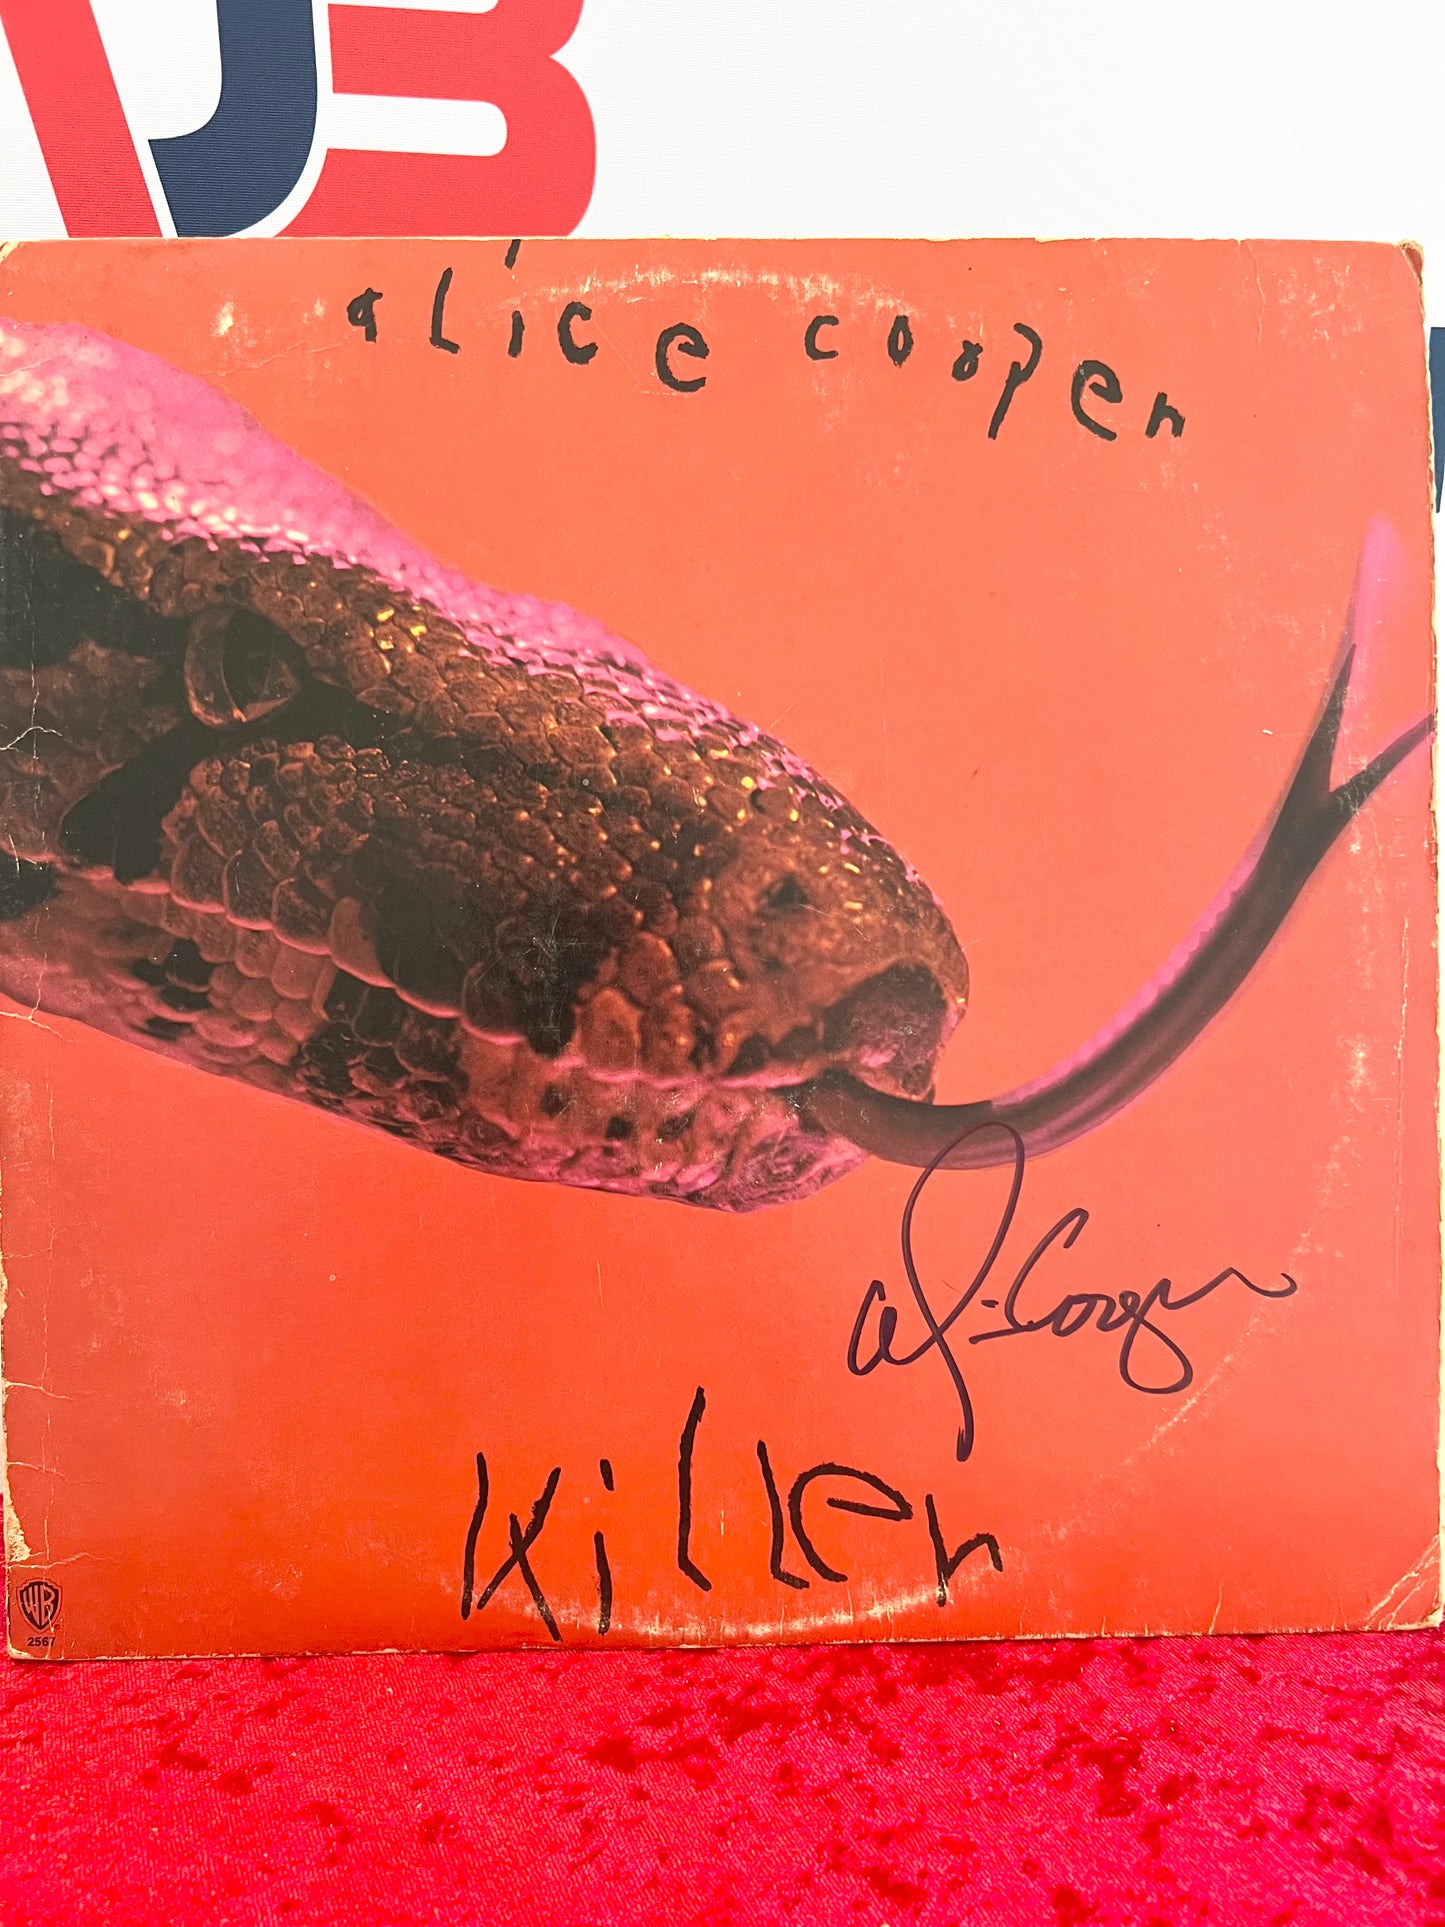 Alice Cooper Signed Autographed Killer Vinyl LP With Authentication